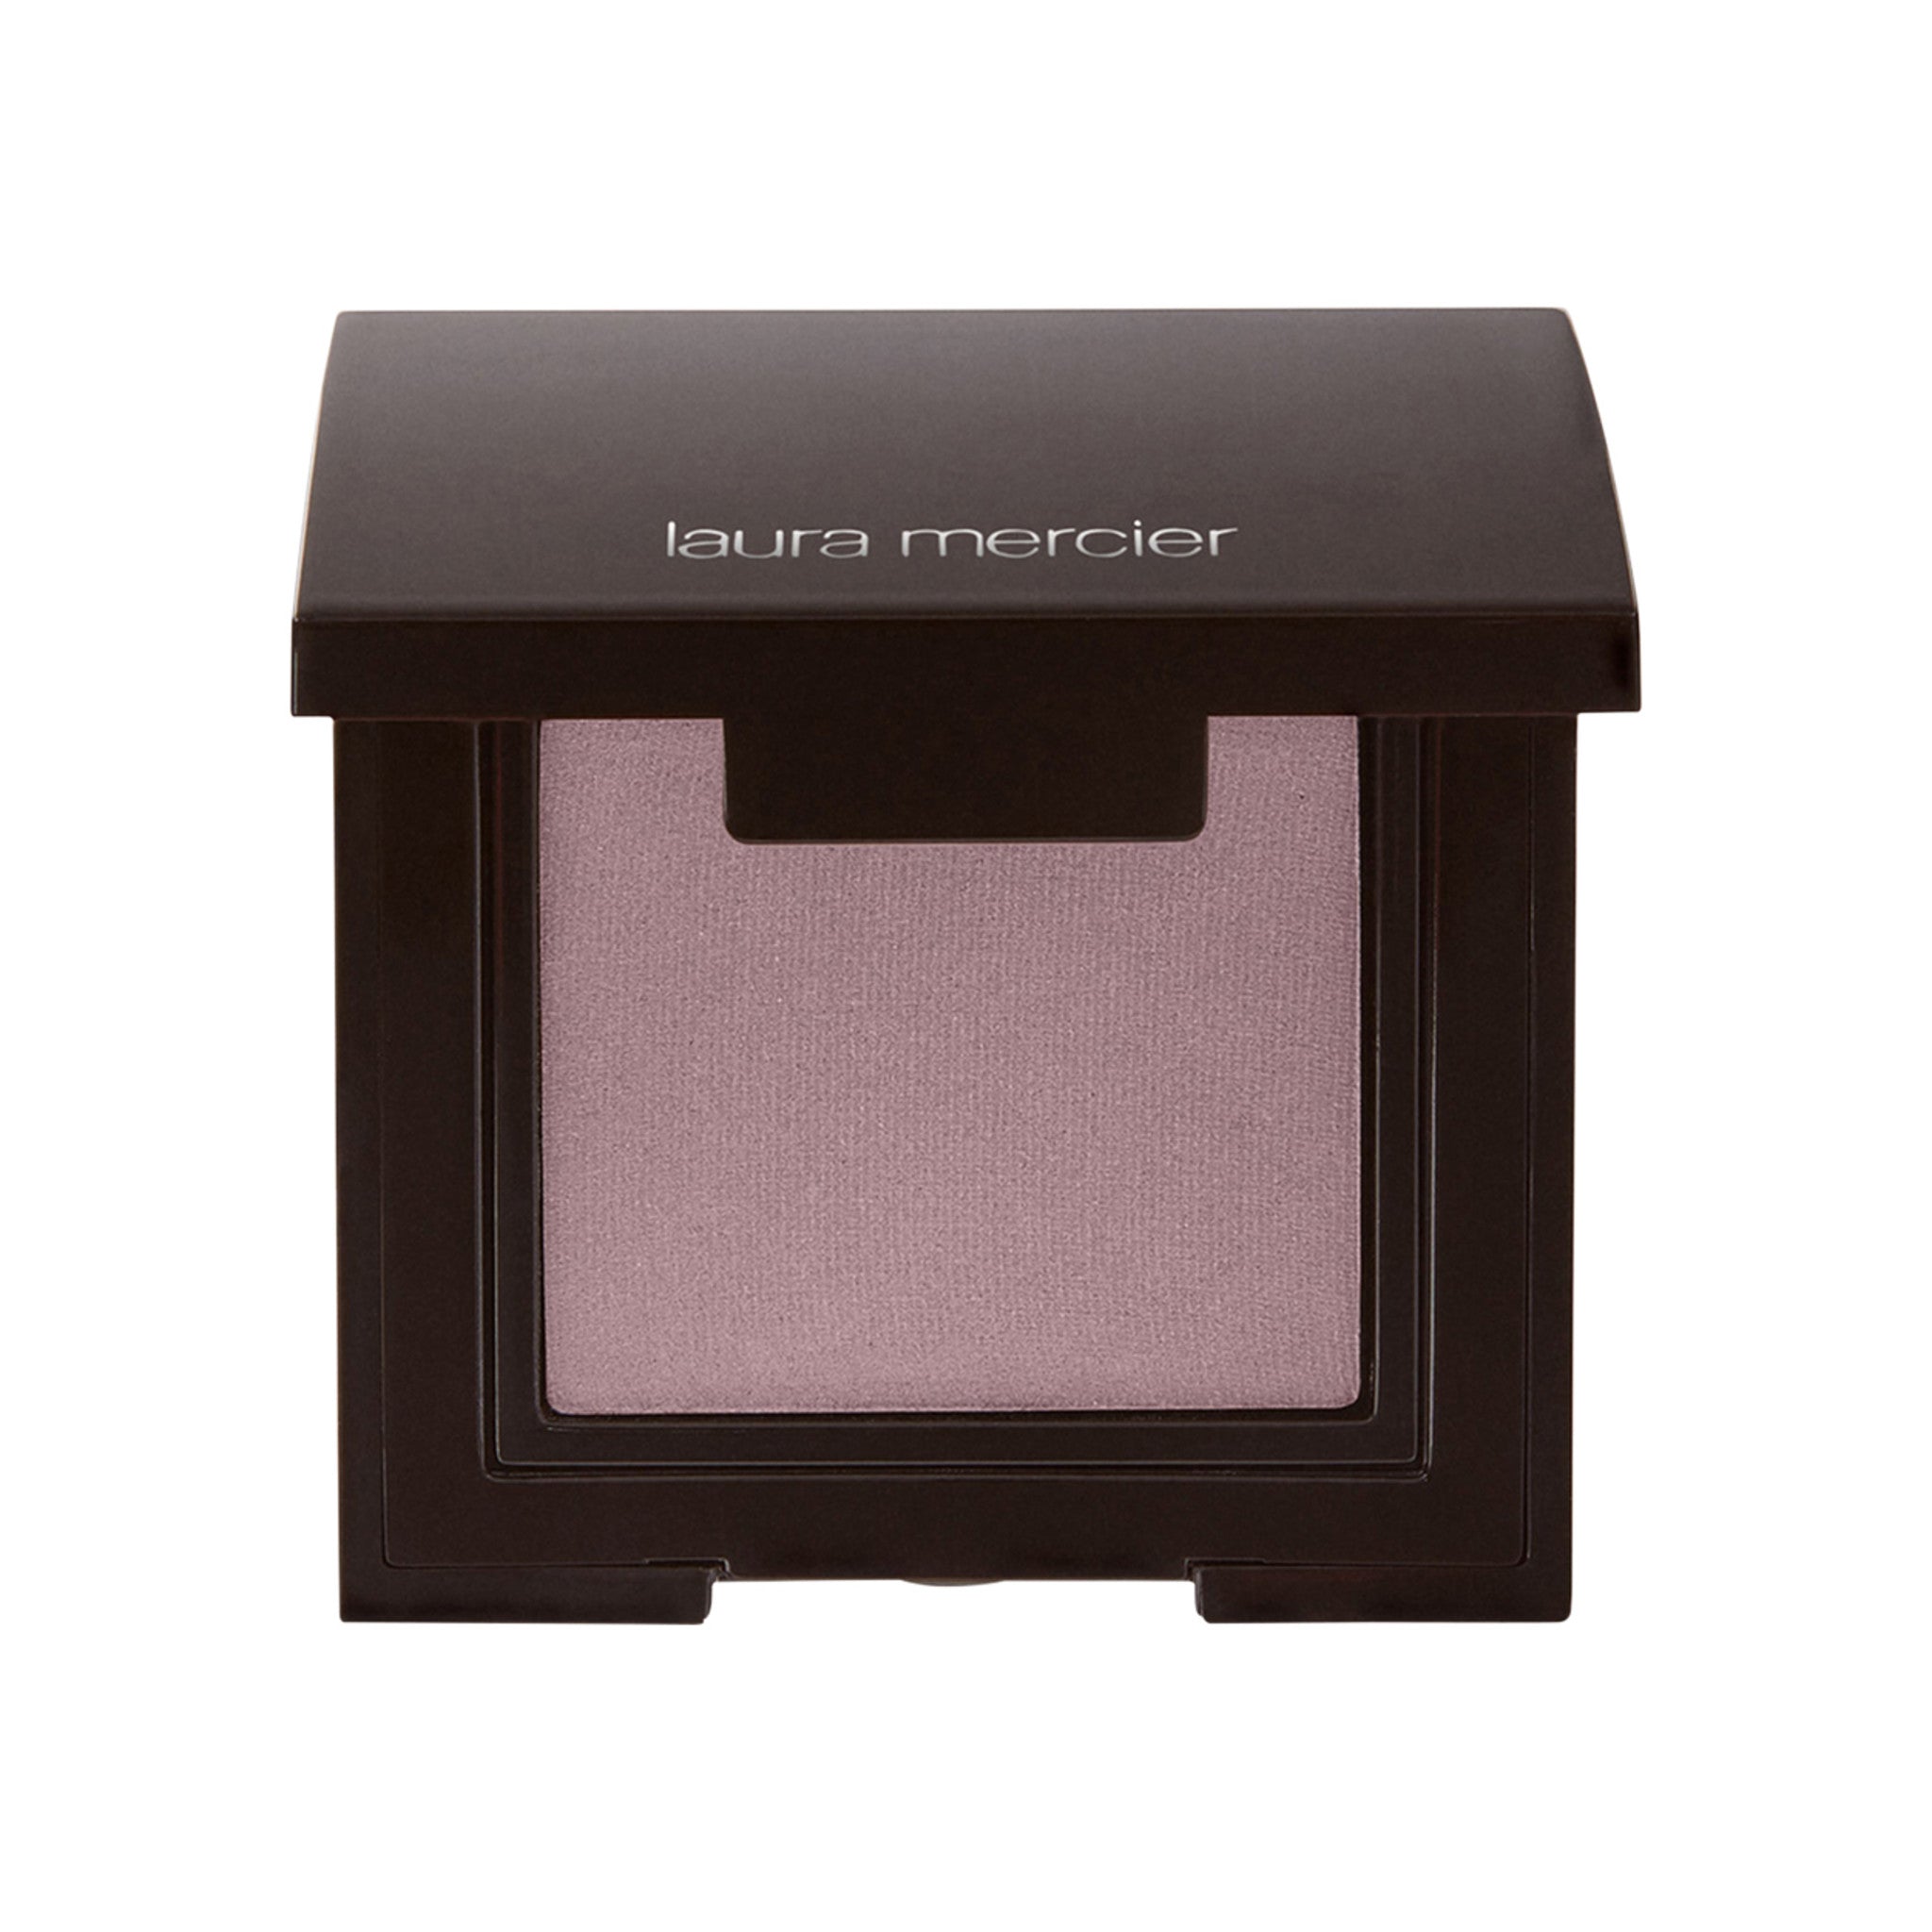 Laura Mercier Luster Eye Colour Color/Shade variant: African Violet main image. This product is in the color green